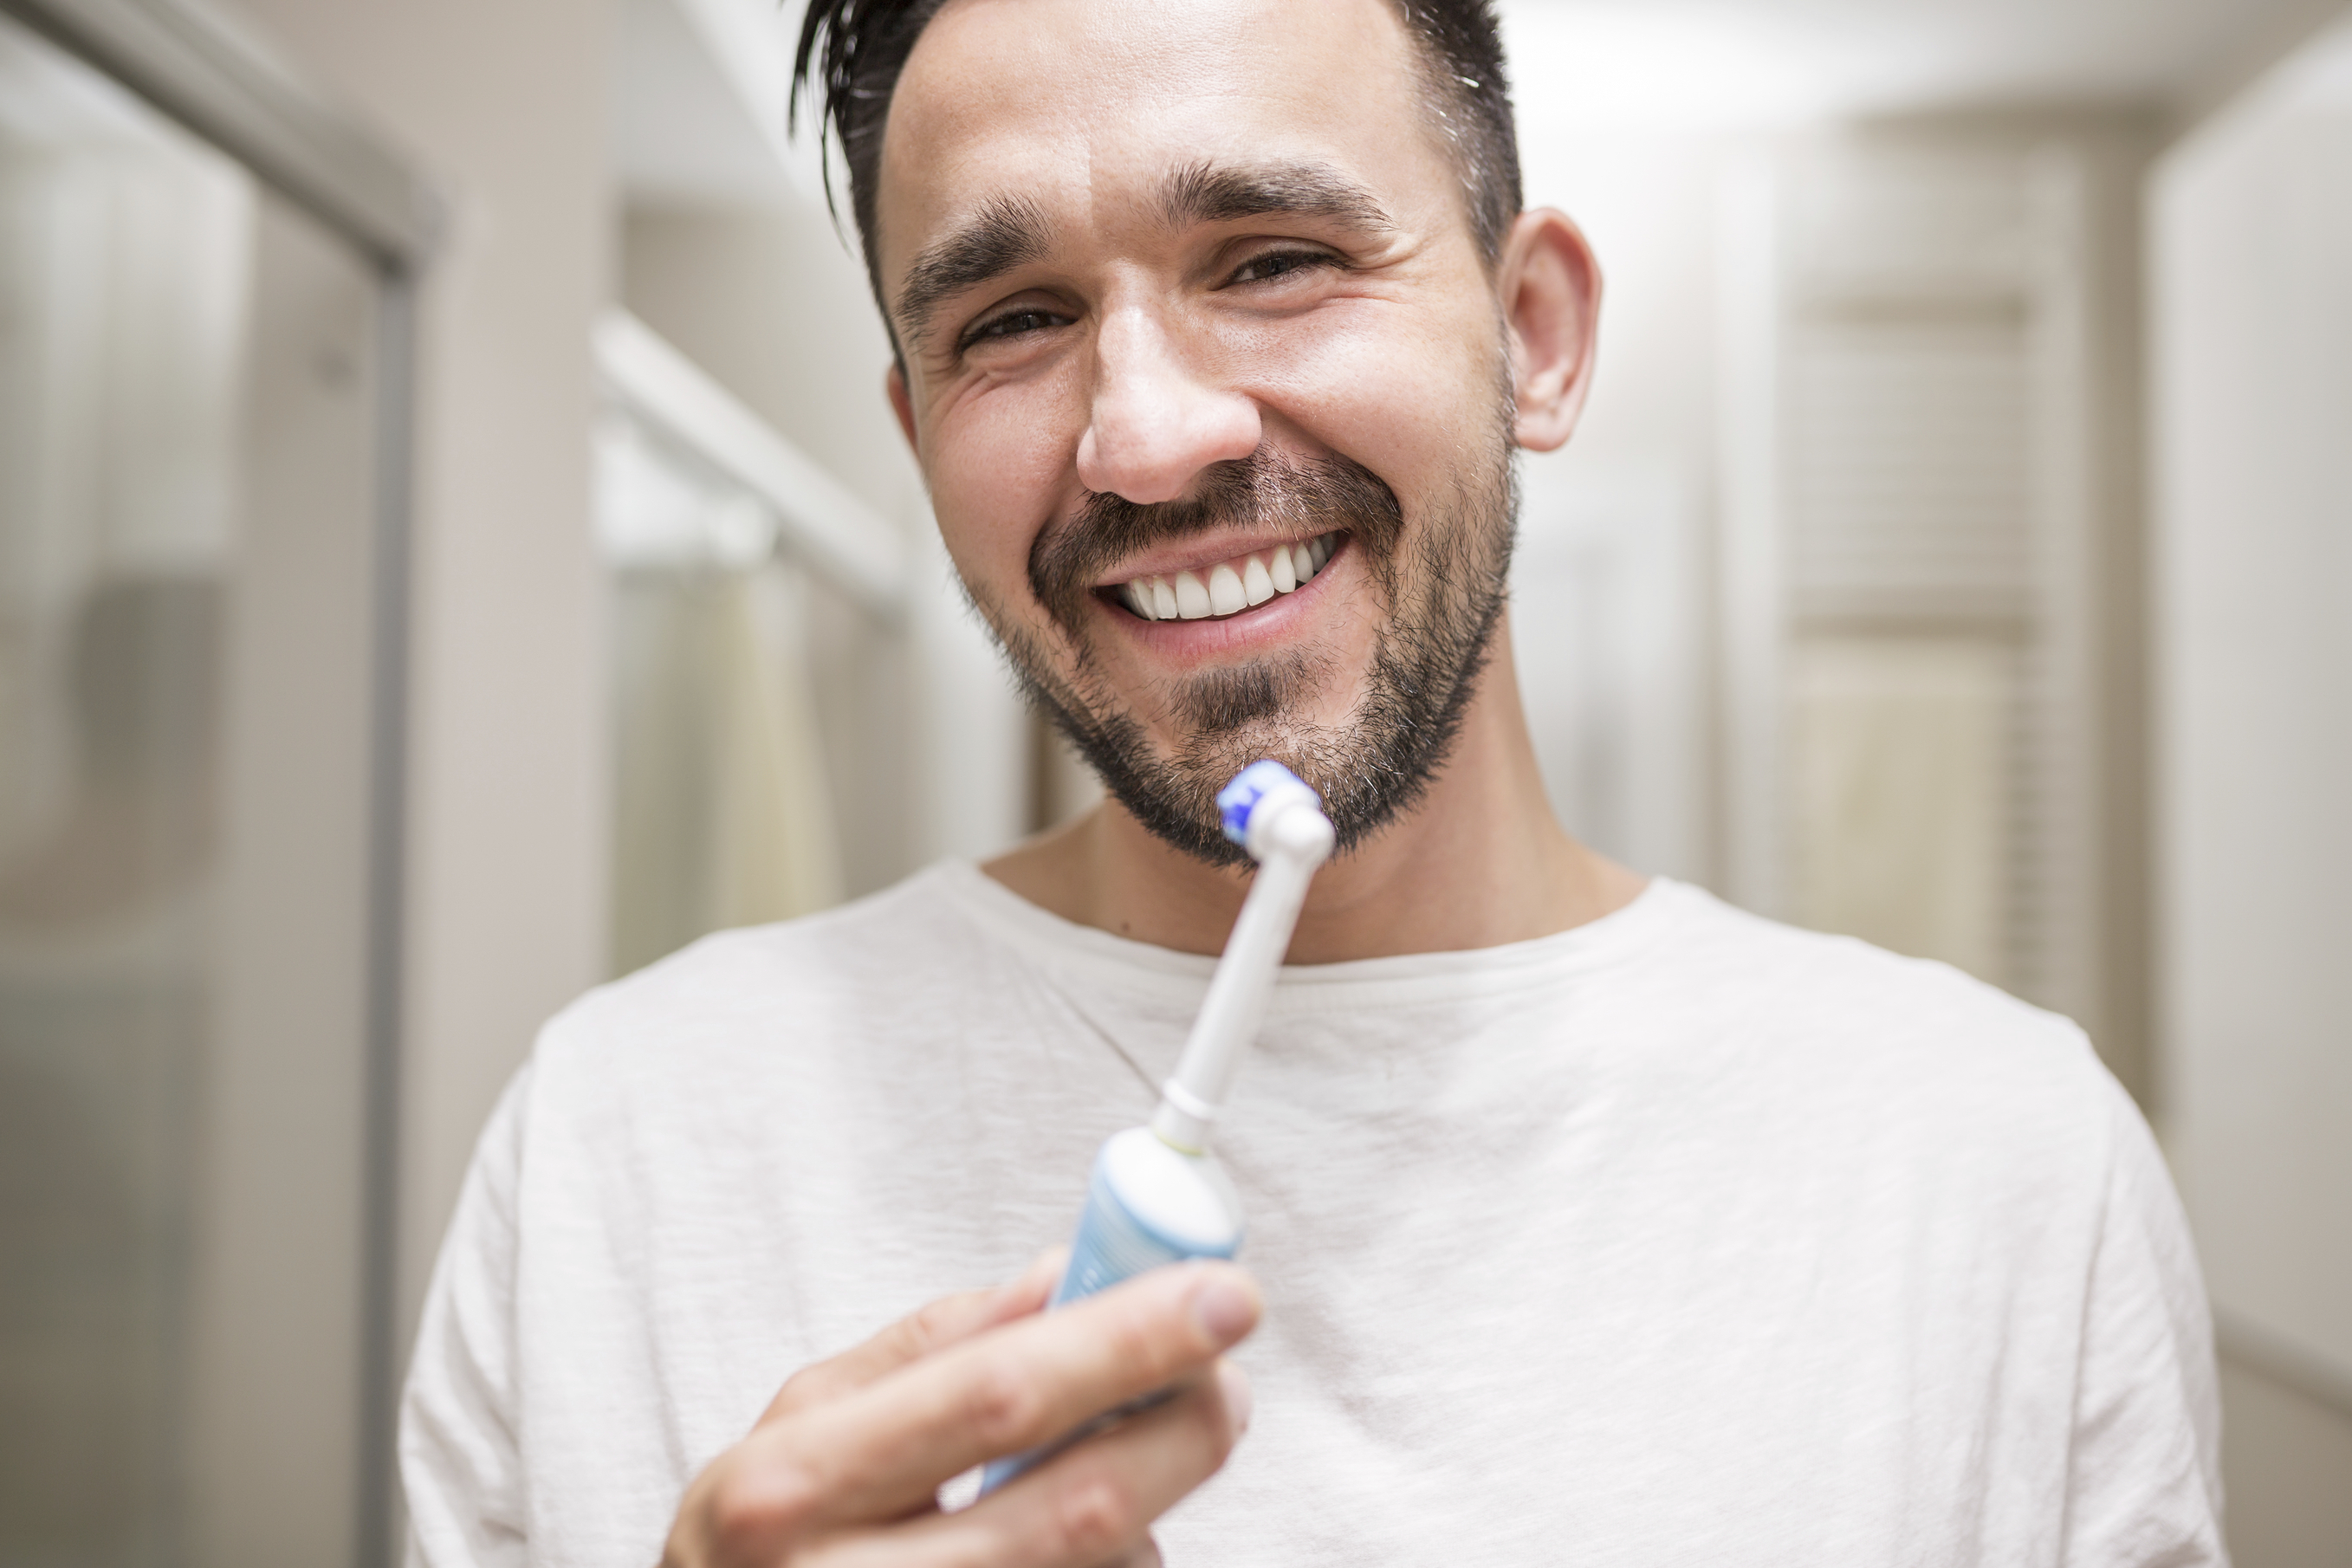 Is an electric toothbrush better